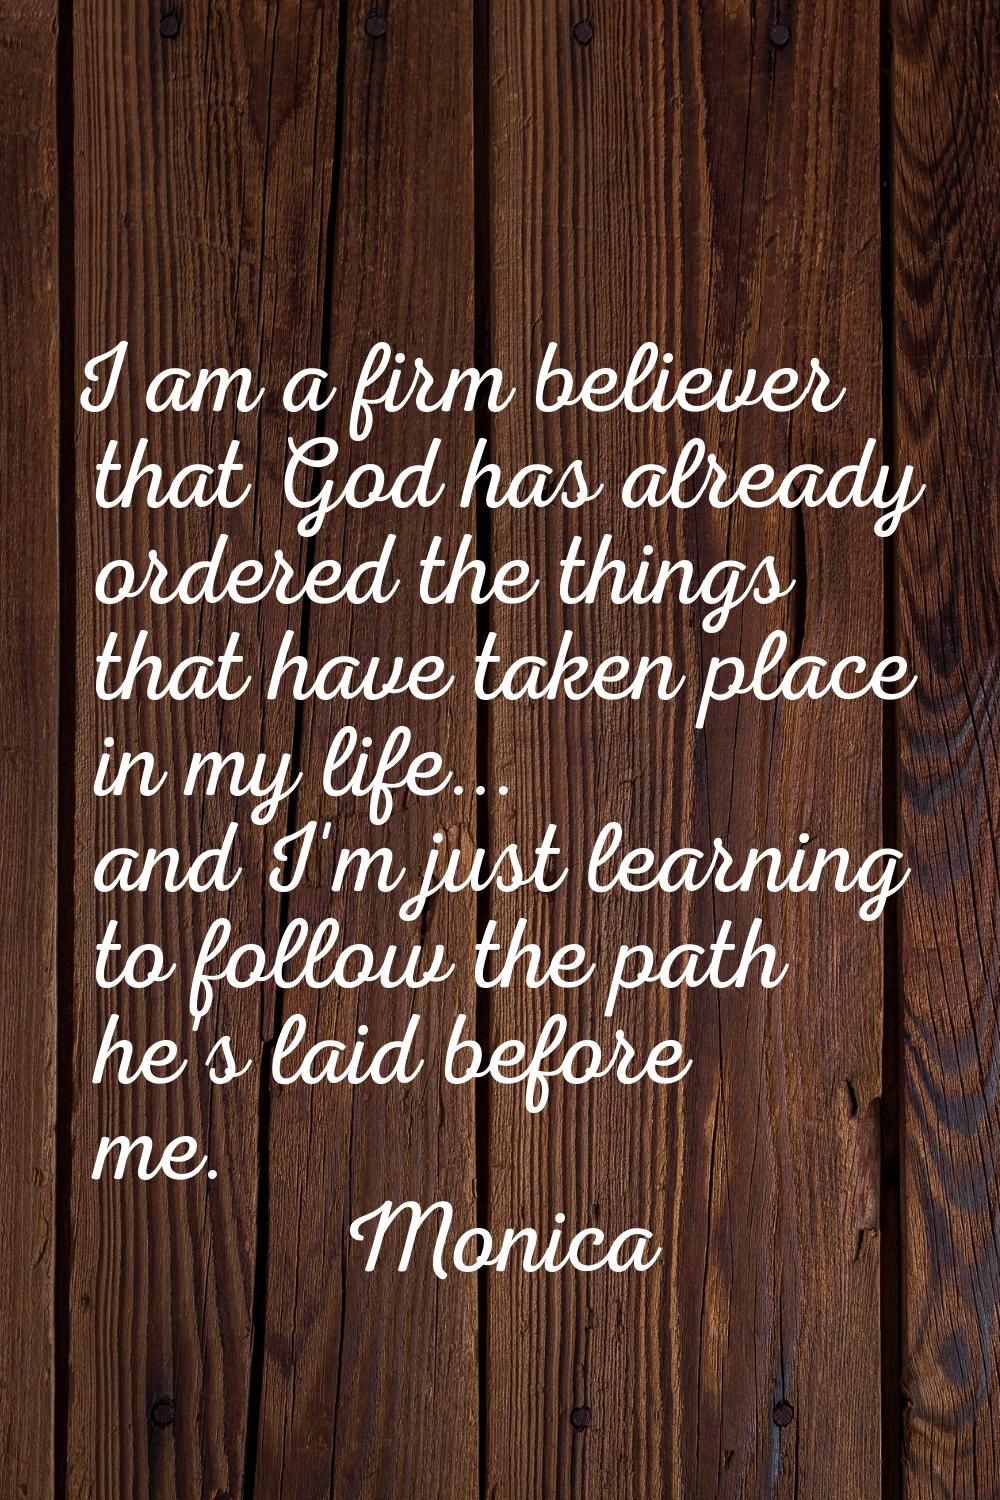 I am a firm believer that God has already ordered the things that have taken place in my life... an